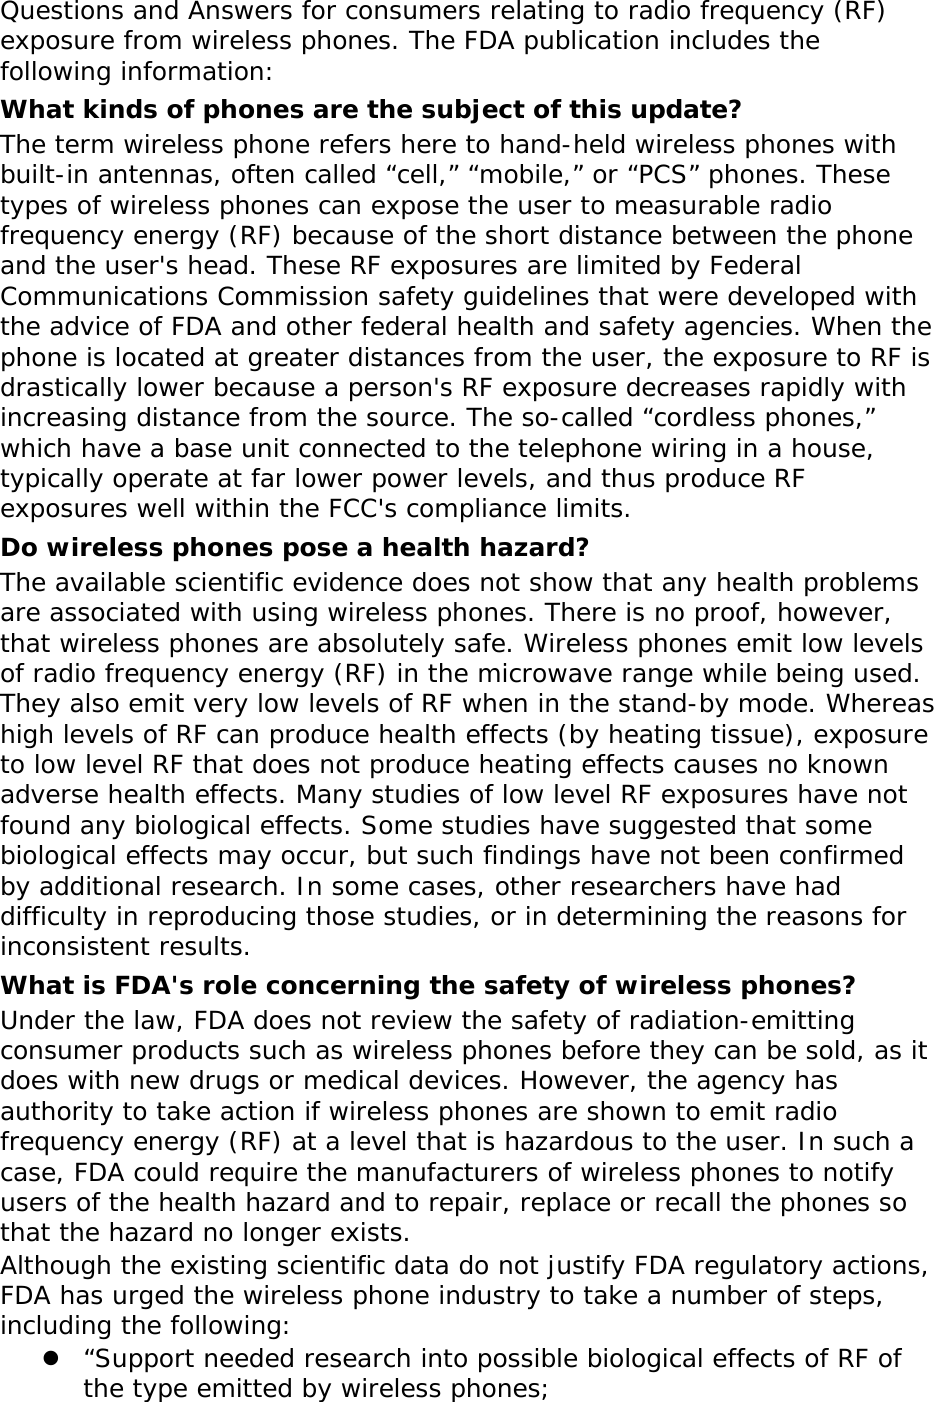 Questions and Answers for consumers relating to radio frequency (RF) exposure from wireless phones. The FDA publication includes the following information: What kinds of phones are the subject of this update? The term wireless phone refers here to hand-held wireless phones with built-in antennas, often called “cell,” “mobile,” or “PCS” phones. These types of wireless phones can expose the user to measurable radio frequency energy (RF) because of the short distance between the phone and the user&apos;s head. These RF exposures are limited by Federal Communications Commission safety guidelines that were developed with the advice of FDA and other federal health and safety agencies. When the phone is located at greater distances from the user, the exposure to RF is drastically lower because a person&apos;s RF exposure decreases rapidly with increasing distance from the source. The so-called “cordless phones,” which have a base unit connected to the telephone wiring in a house, typically operate at far lower power levels, and thus produce RF exposures well within the FCC&apos;s compliance limits. Do wireless phones pose a health hazard? The available scientific evidence does not show that any health problems are associated with using wireless phones. There is no proof, however, that wireless phones are absolutely safe. Wireless phones emit low levels of radio frequency energy (RF) in the microwave range while being used. They also emit very low levels of RF when in the stand-by mode. Whereas high levels of RF can produce health effects (by heating tissue), exposure to low level RF that does not produce heating effects causes no known adverse health effects. Many studies of low level RF exposures have not found any biological effects. Some studies have suggested that some biological effects may occur, but such findings have not been confirmed by additional research. In some cases, other researchers have had difficulty in reproducing those studies, or in determining the reasons for inconsistent results. What is FDA&apos;s role concerning the safety of wireless phones? Under the law, FDA does not review the safety of radiation-emitting consumer products such as wireless phones before they can be sold, as it does with new drugs or medical devices. However, the agency has authority to take action if wireless phones are shown to emit radio frequency energy (RF) at a level that is hazardous to the user. In such a case, FDA could require the manufacturers of wireless phones to notify users of the health hazard and to repair, replace or recall the phones so that the hazard no longer exists. Although the existing scientific data do not justify FDA regulatory actions, FDA has urged the wireless phone industry to take a number of steps, including the following:  “Support needed research into possible biological effects of RF of the type emitted by wireless phones; 